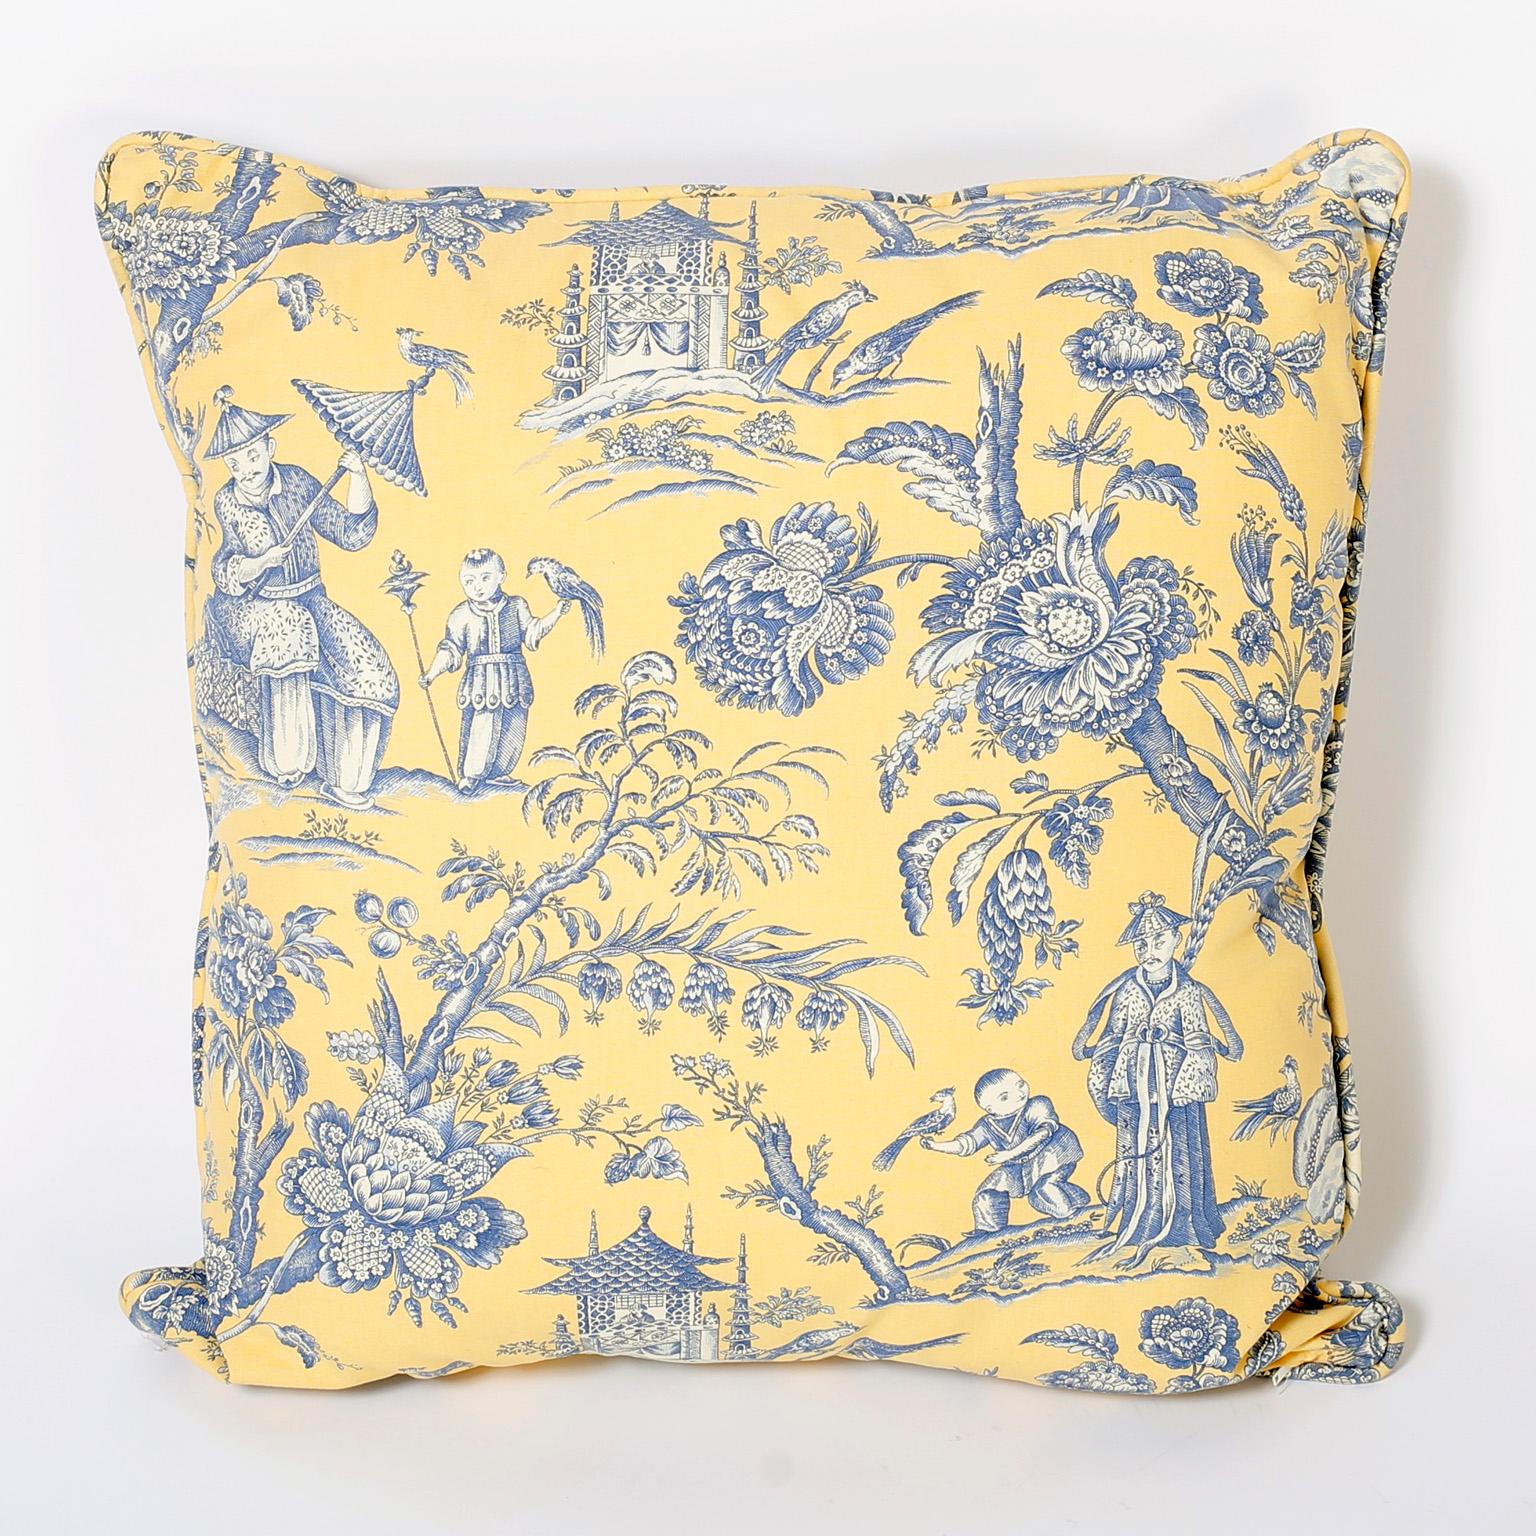 Classical chinoiserie French toile style linen pillows with blue figures and flowers over a yellow background. Discreet zippers in the seam.